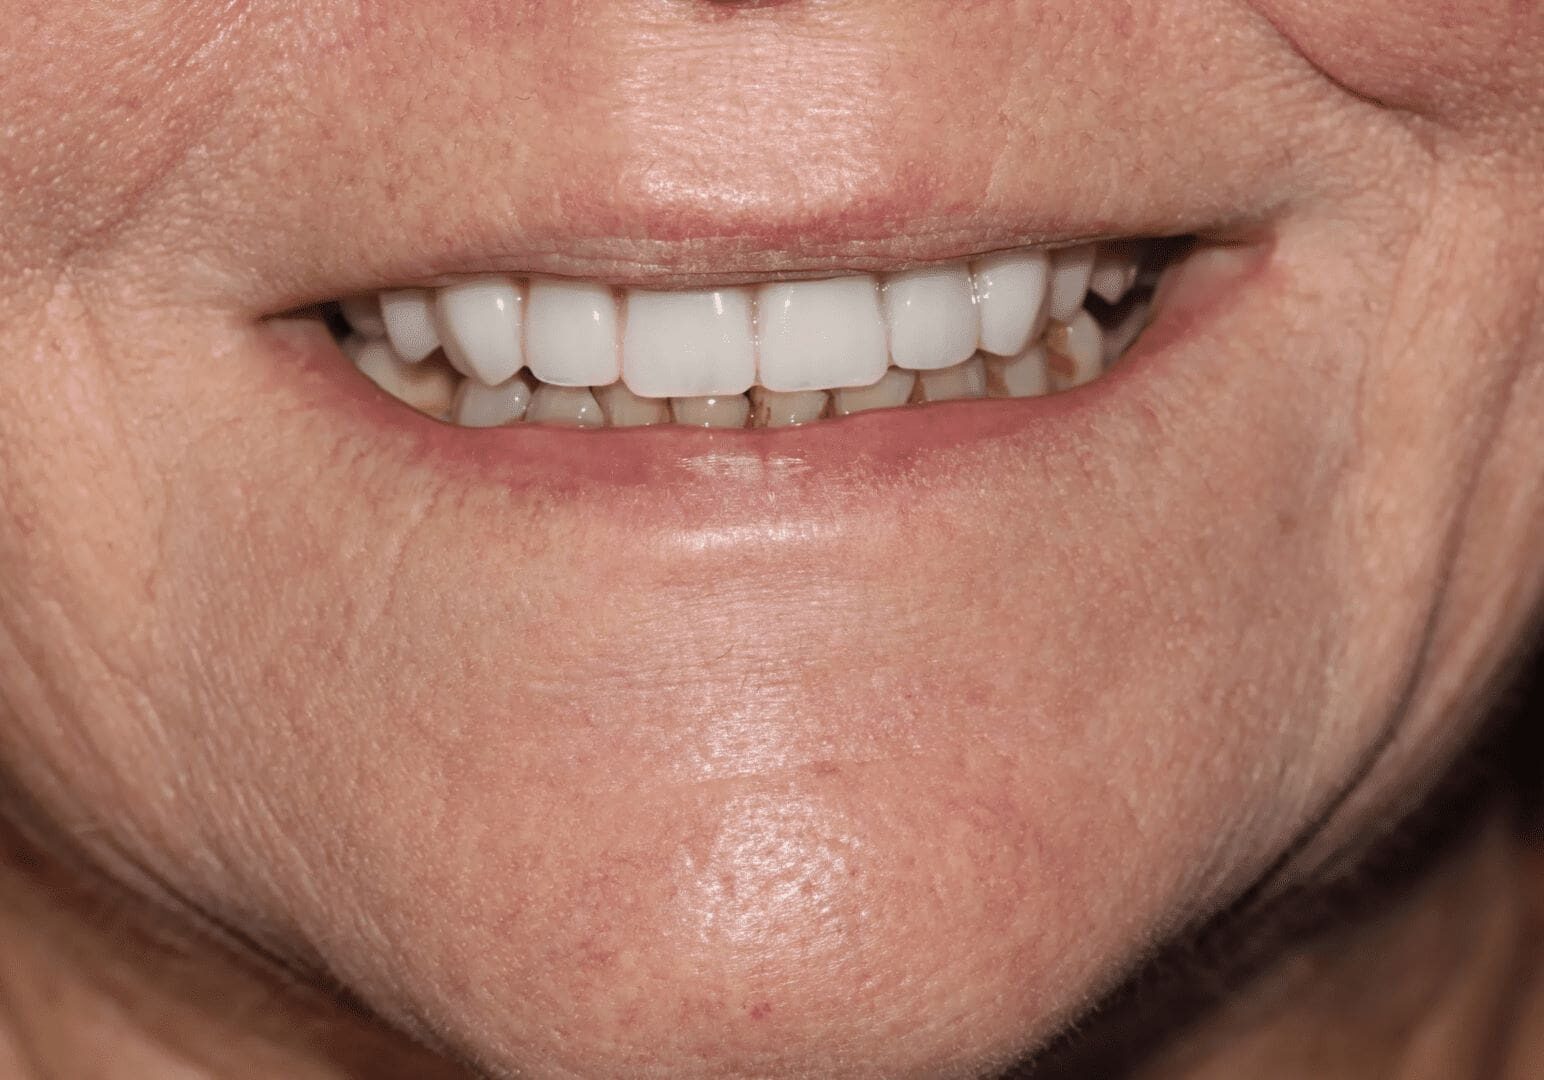 A close up of the teeth of a woman